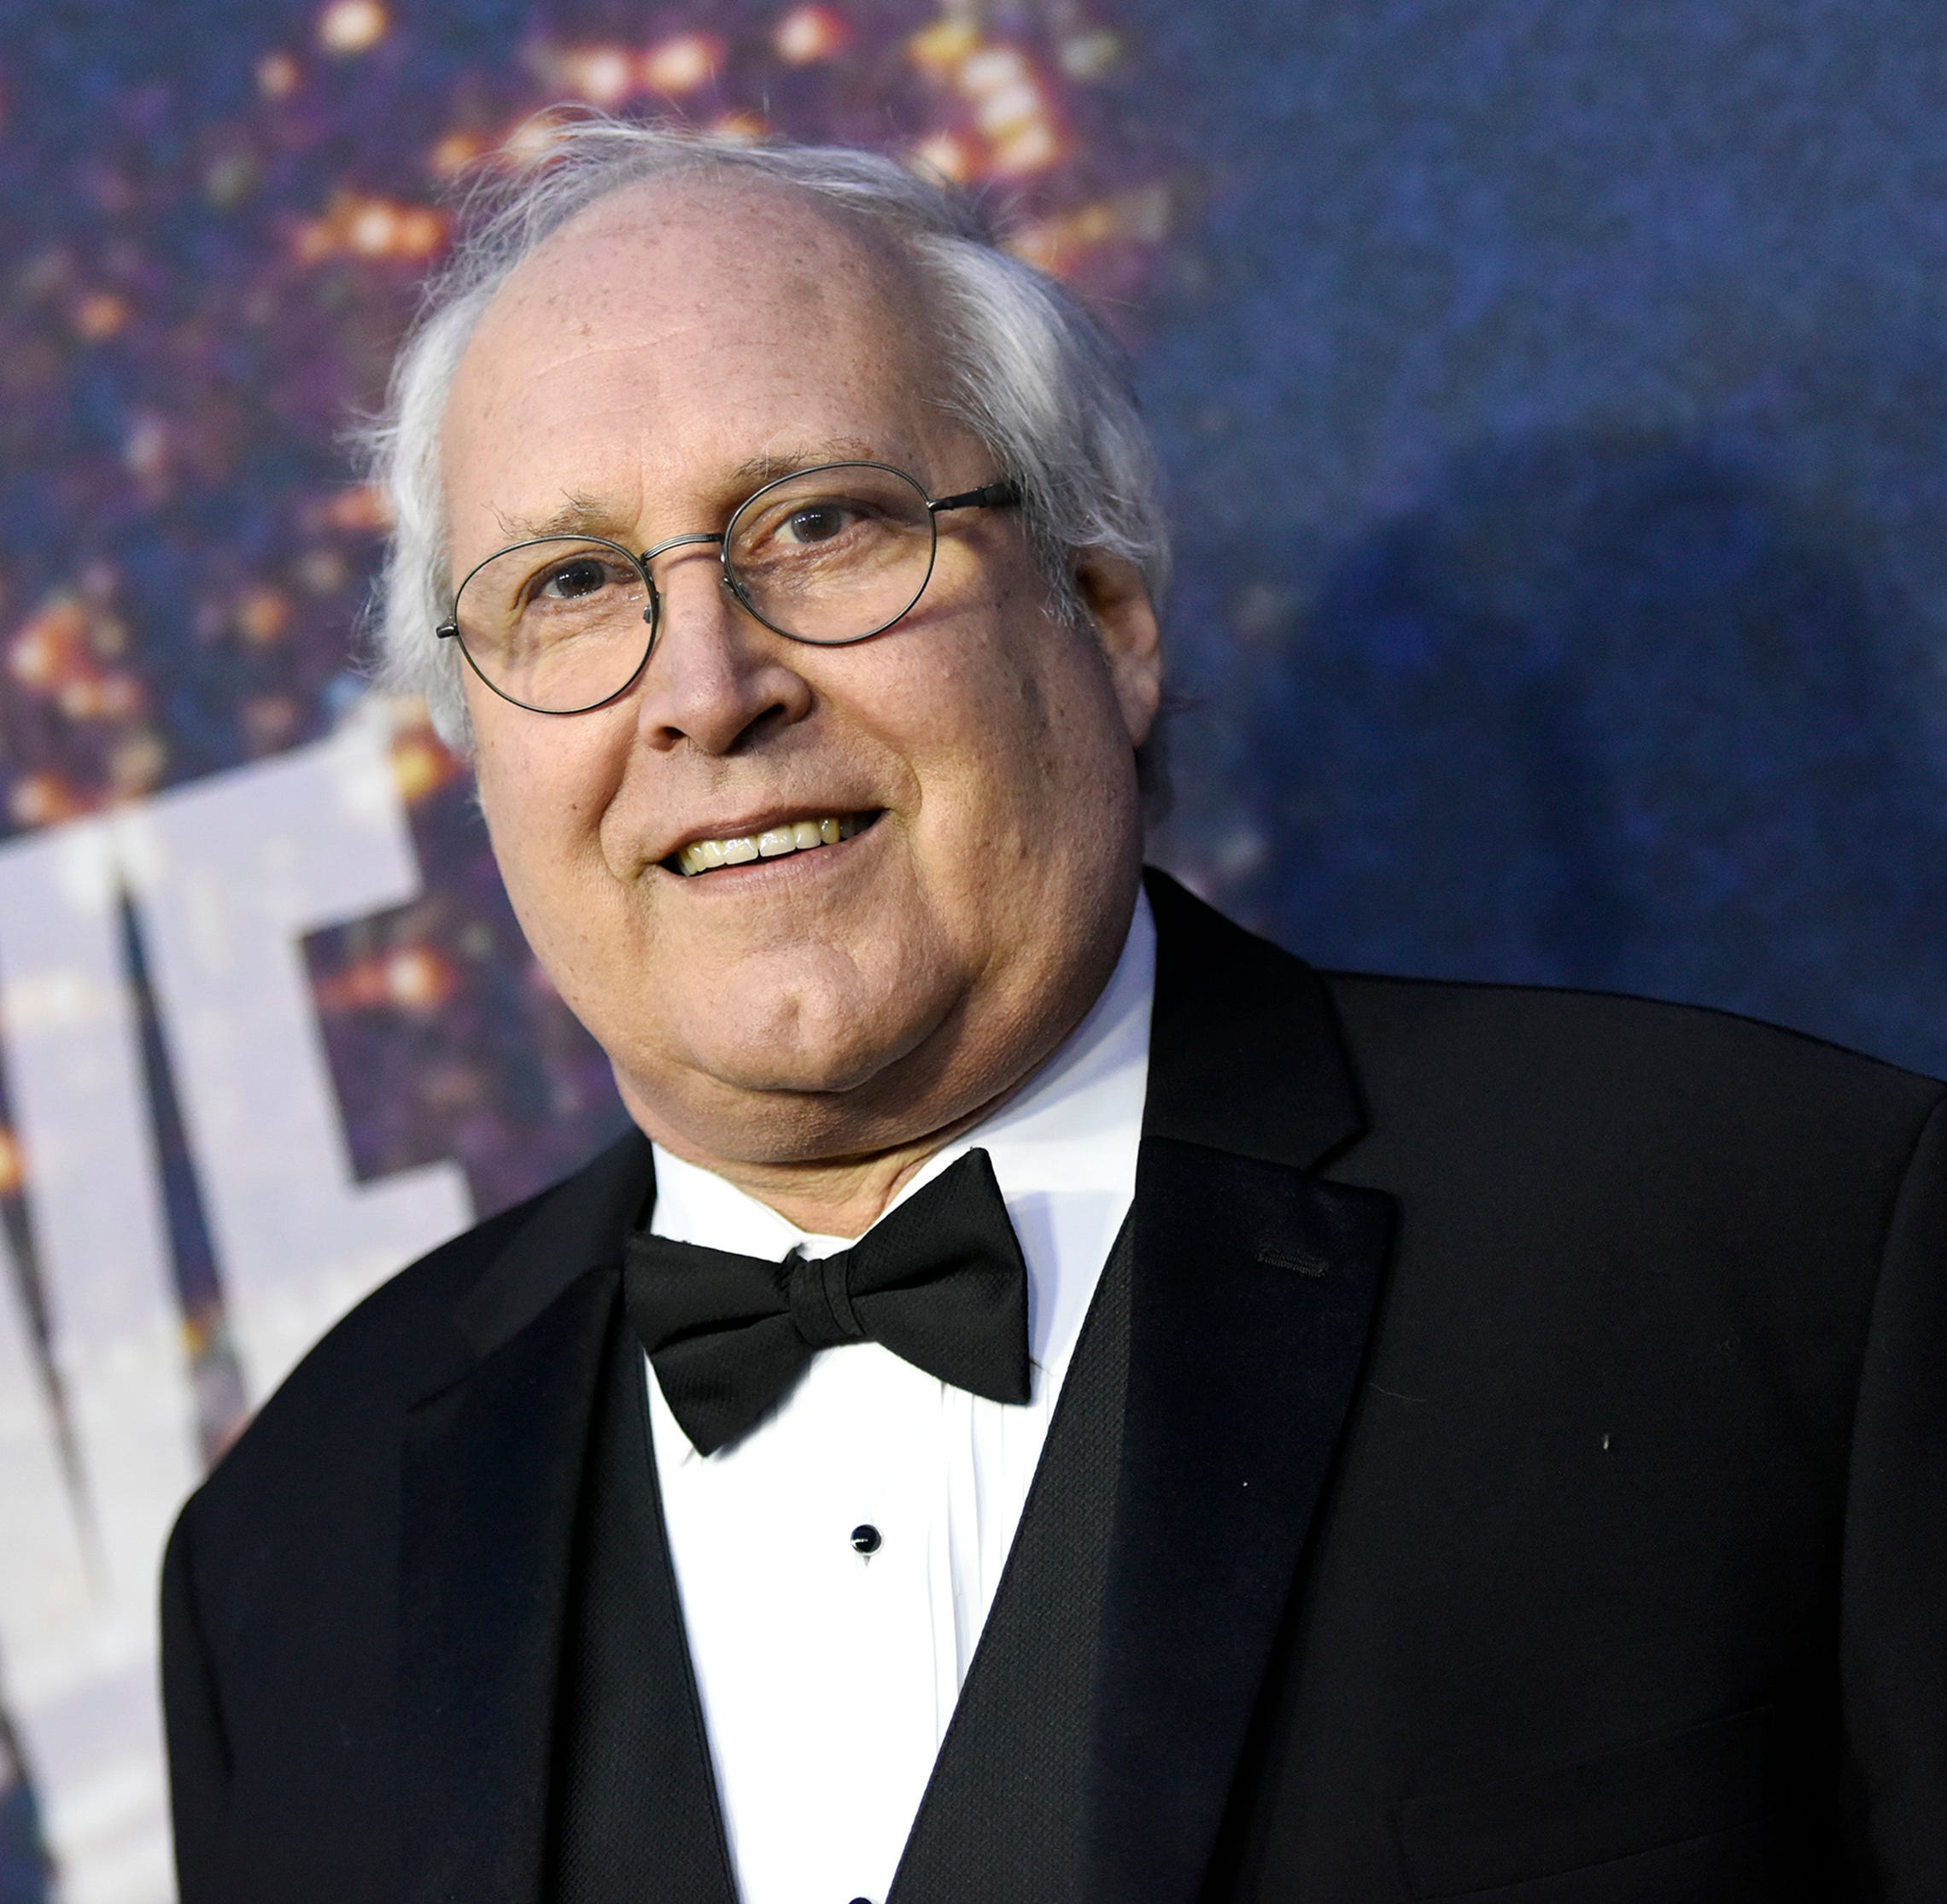 Chevy Chase attends the SNL 40th Anniversary Special at Rockefeller Plaza, in New York in Feb. 15, 2015.